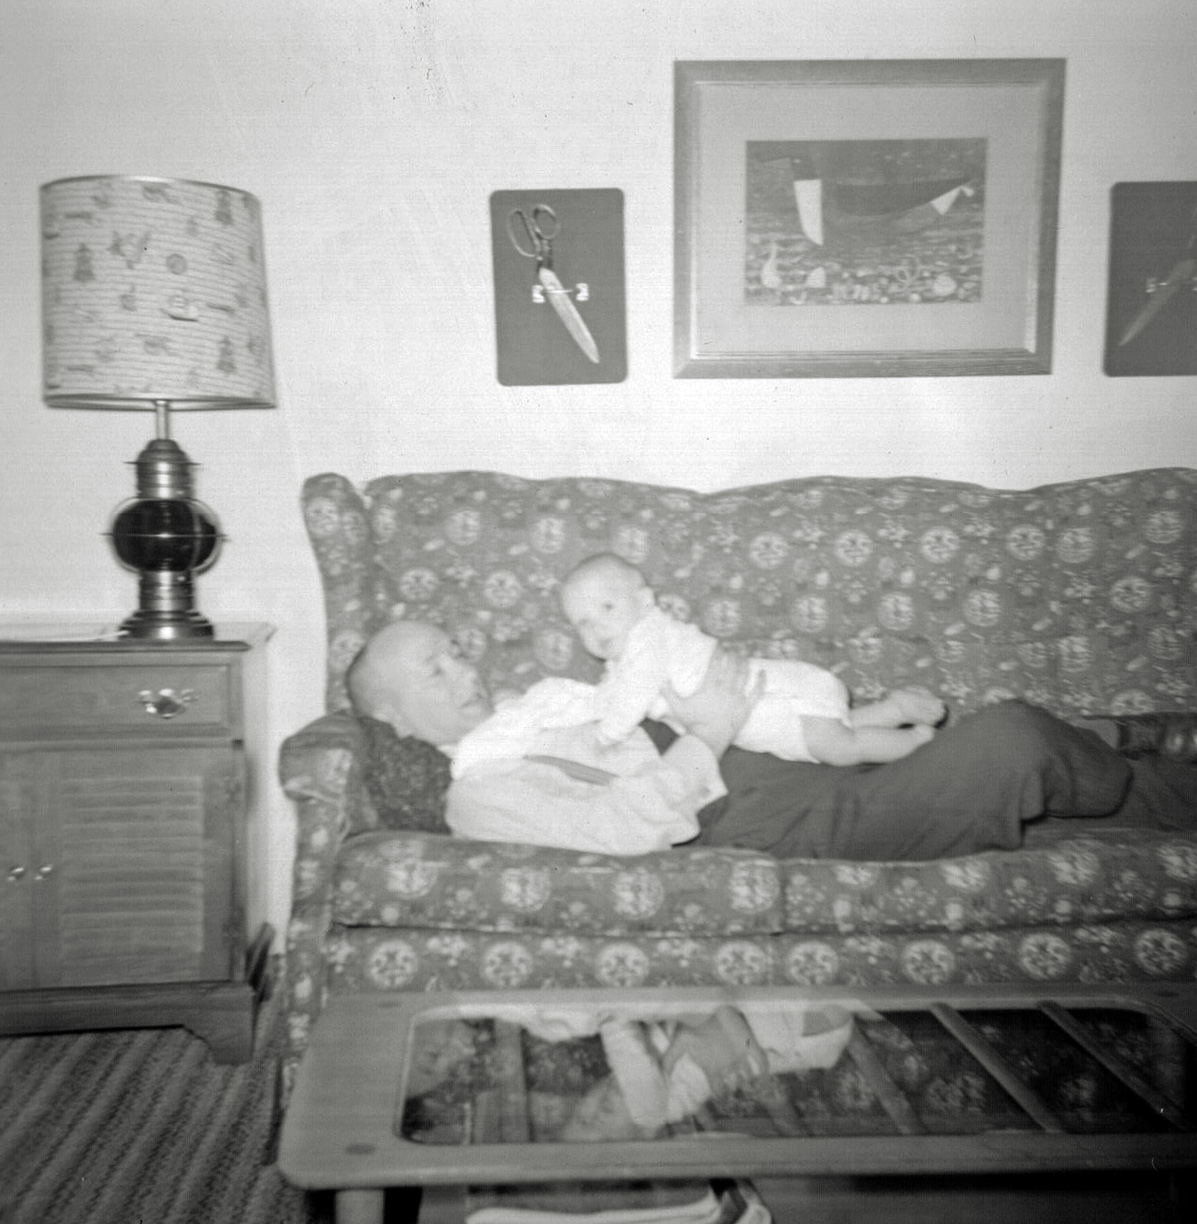 As the sixties replaced the fifties, my mother gave away most of the original mid-century modern furniture and turned to colonial revival to decorate our Levittown house. Here my father Howard plays with my less-than-year-old brother Iden on our new red couch, next to a very sixties record cabinet, faux ship’s lantern light fixture, and in front of a left-over glass and blonde wood  mid-century modern coffee table. Above them is a commercial art print of a duck between a set of Issar’s scissors. My mother treasured those scissors. They were her father, Issar’s, primary professional tool. They are mounted on two green velvet-covered wooden cutting boards, using a brass drawer handle (and gravity) to hold them in place. The way my mother mounted them allowed them to still be used as scissors, though their huge size and weight made them impractical.